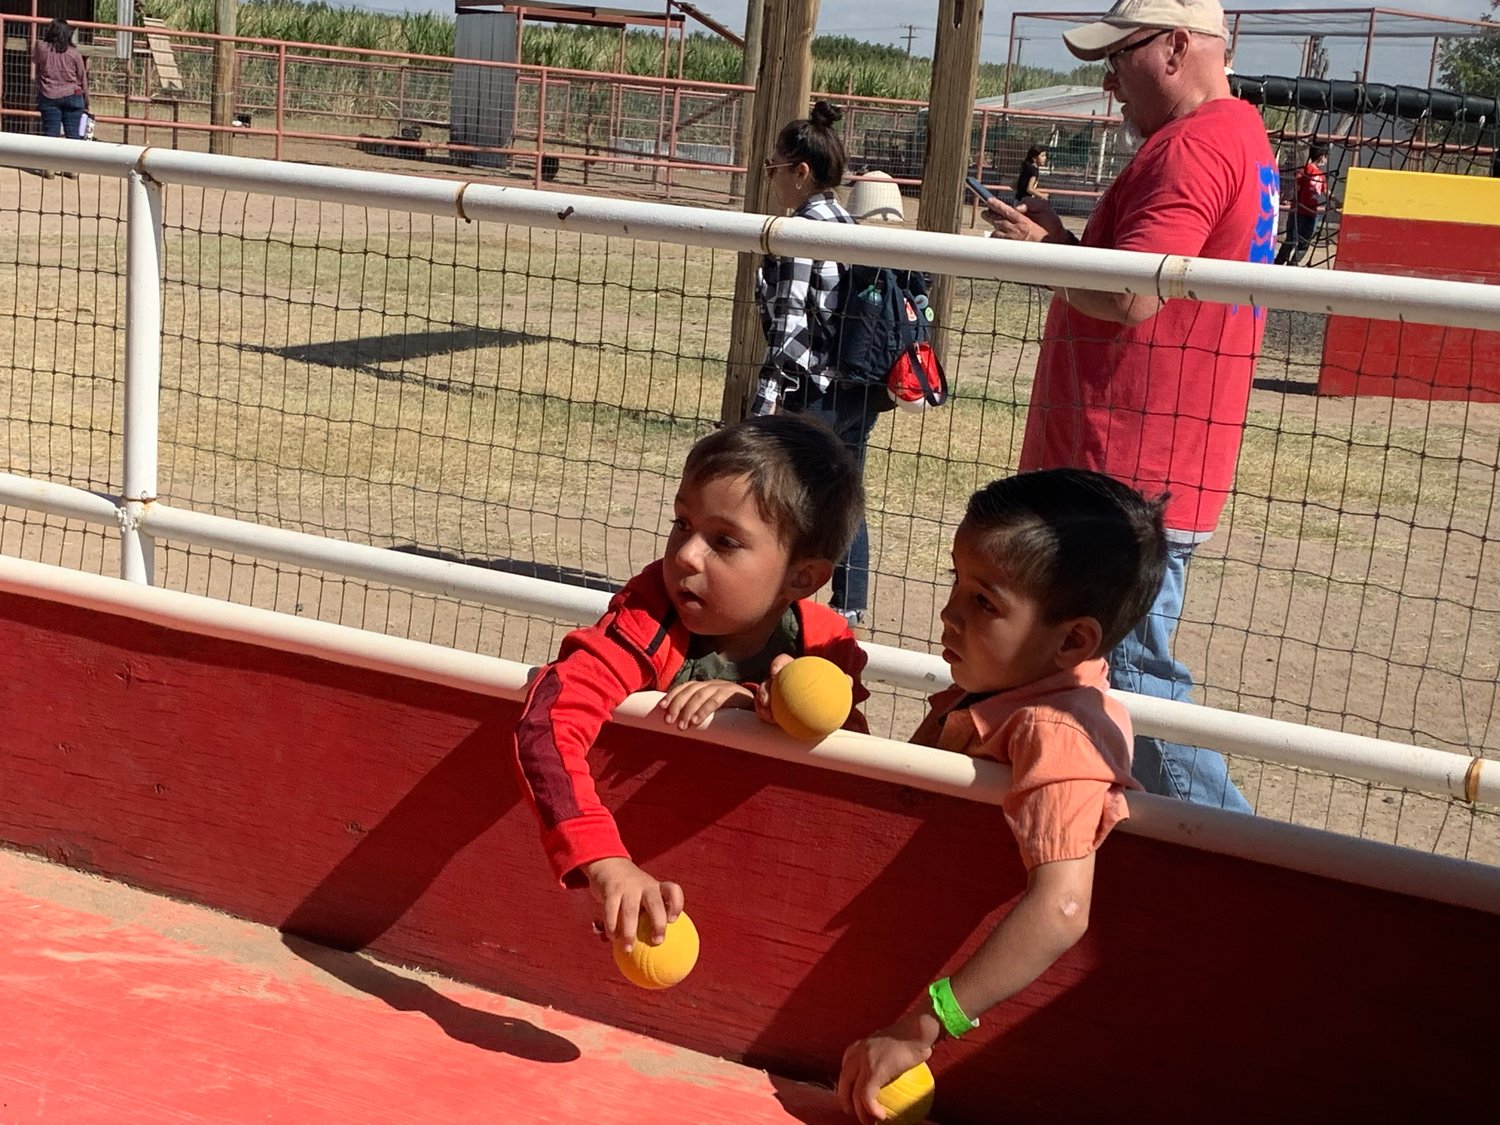 All grades of students are scheduled to visit the maze during weekdays. These young men are part of the Flying Colors Daycare system with three locations across El Paso.